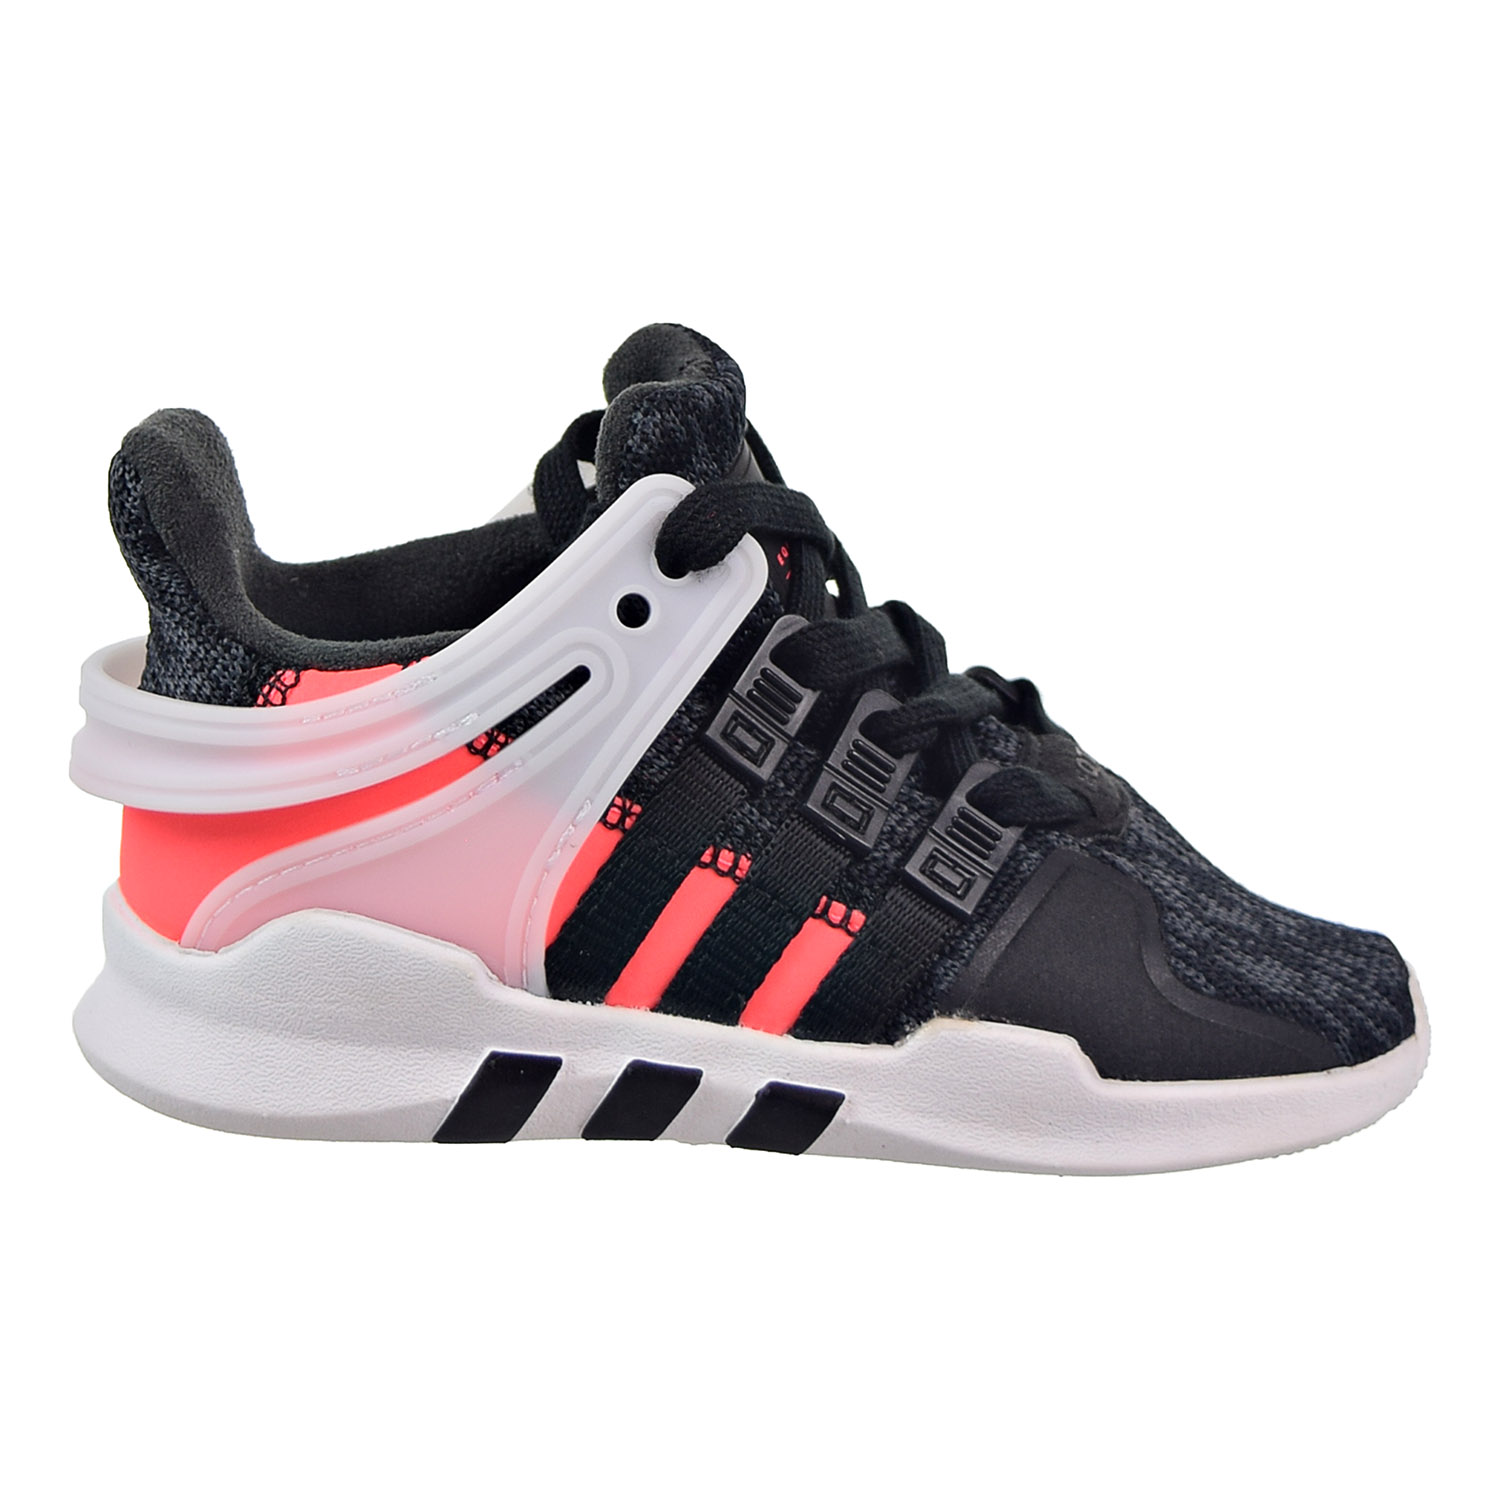 Adidas EQT Support ADV Toddlers Shoes 